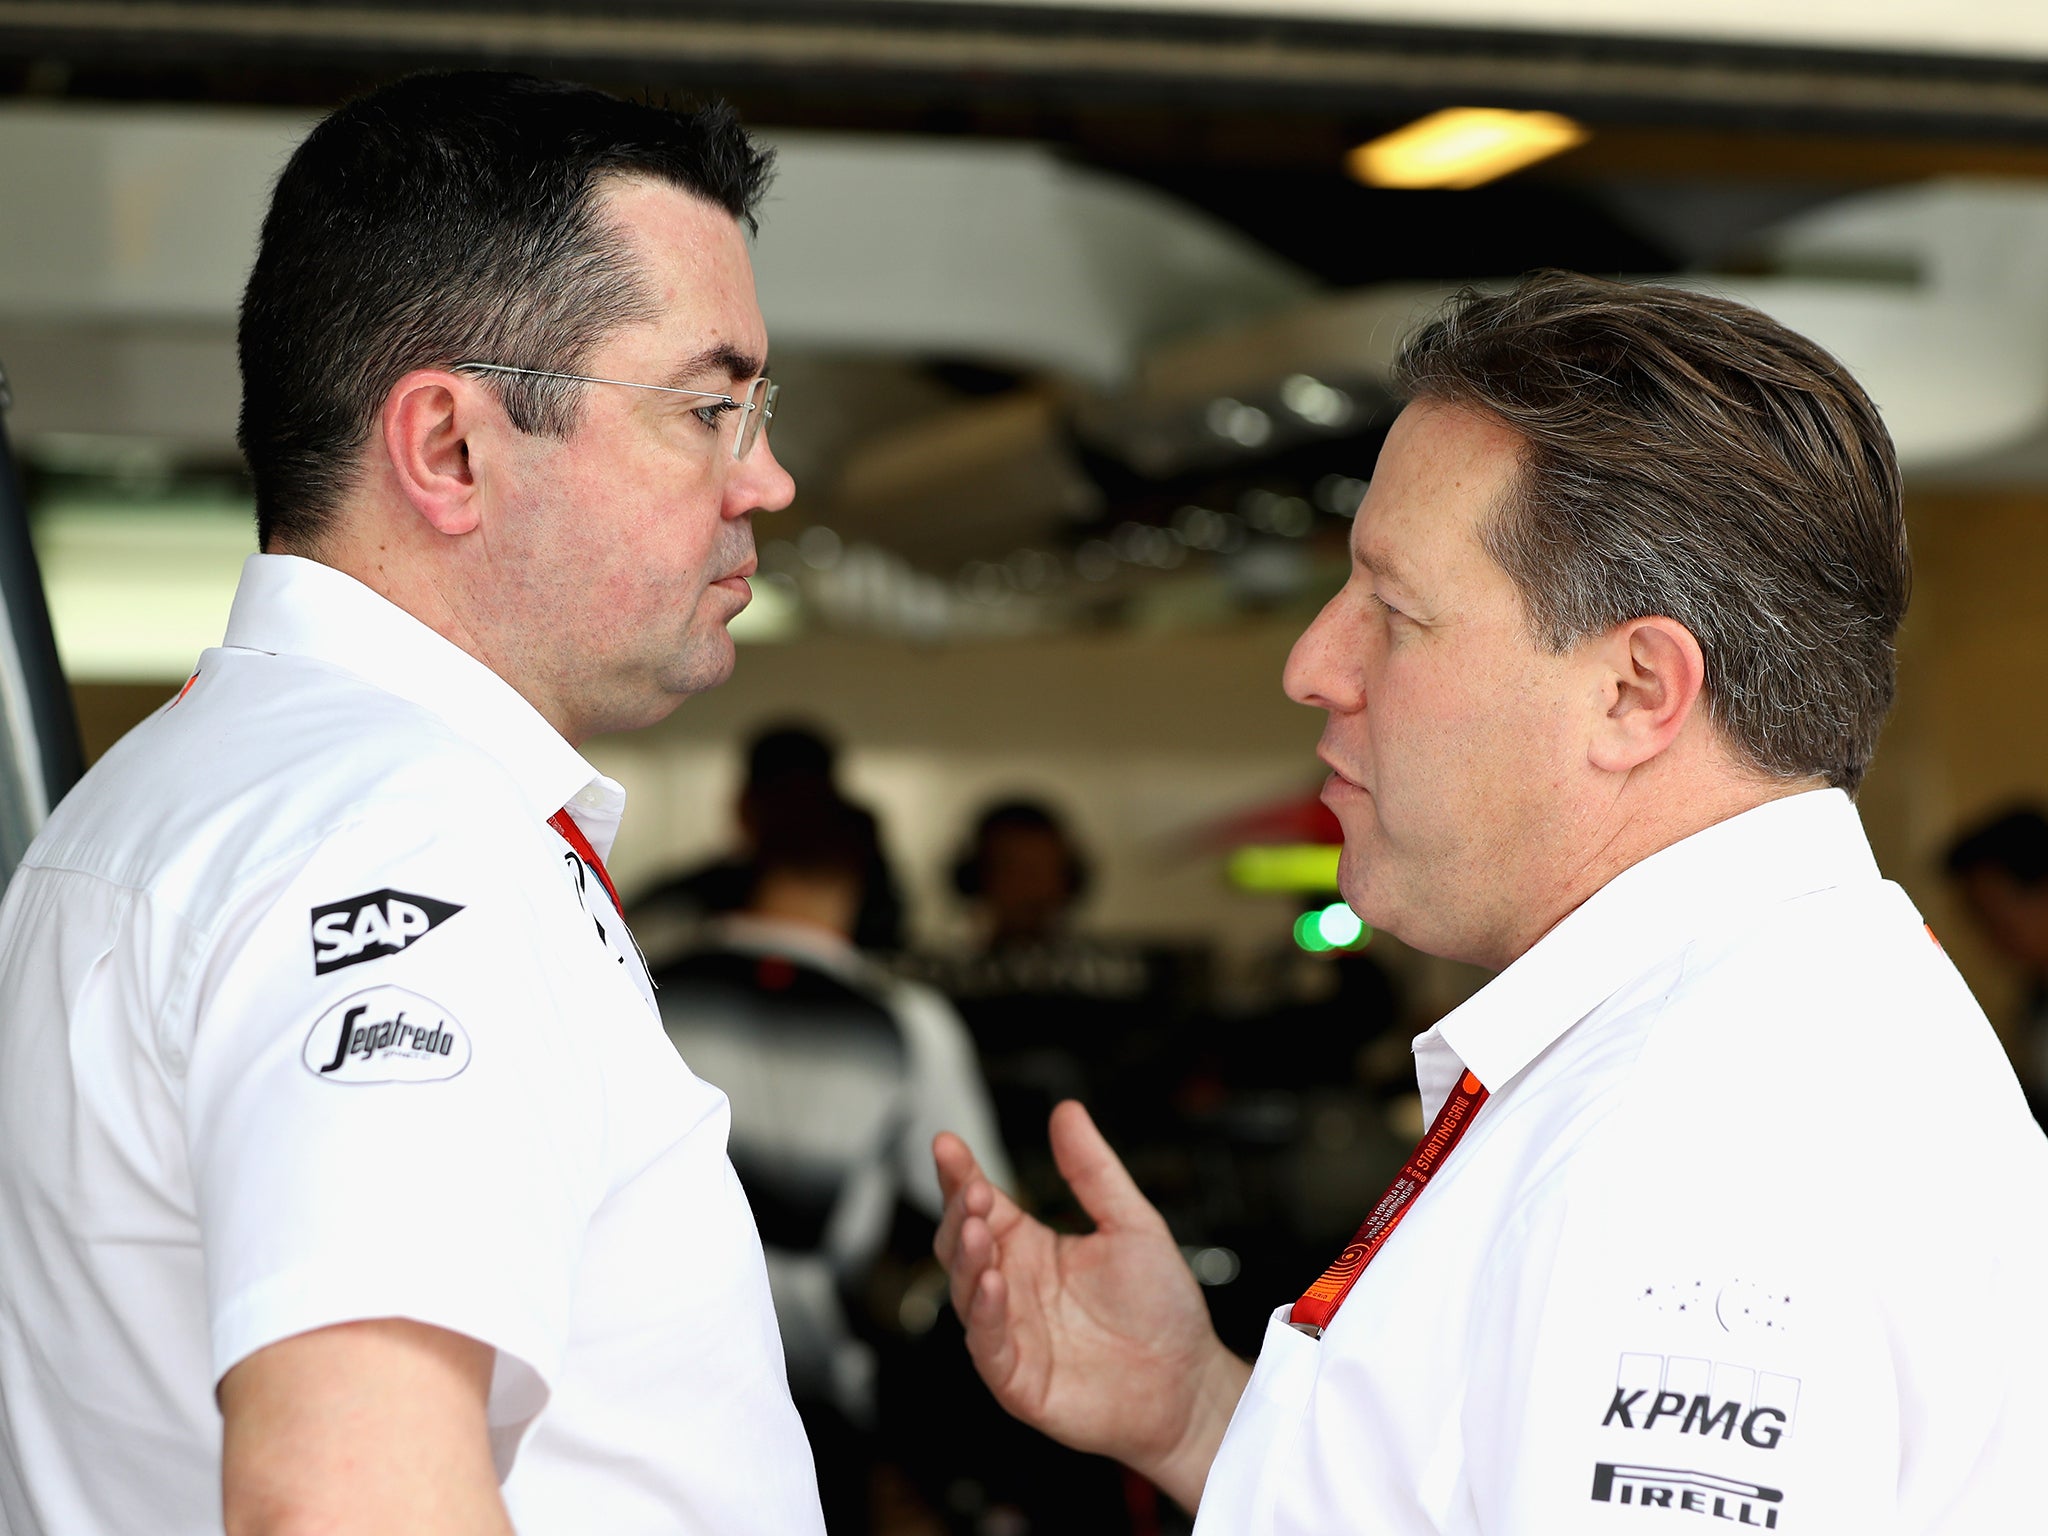 Eric Boullier and Zak Brown have held discussions with Renault about switching McLaren's engine supplier